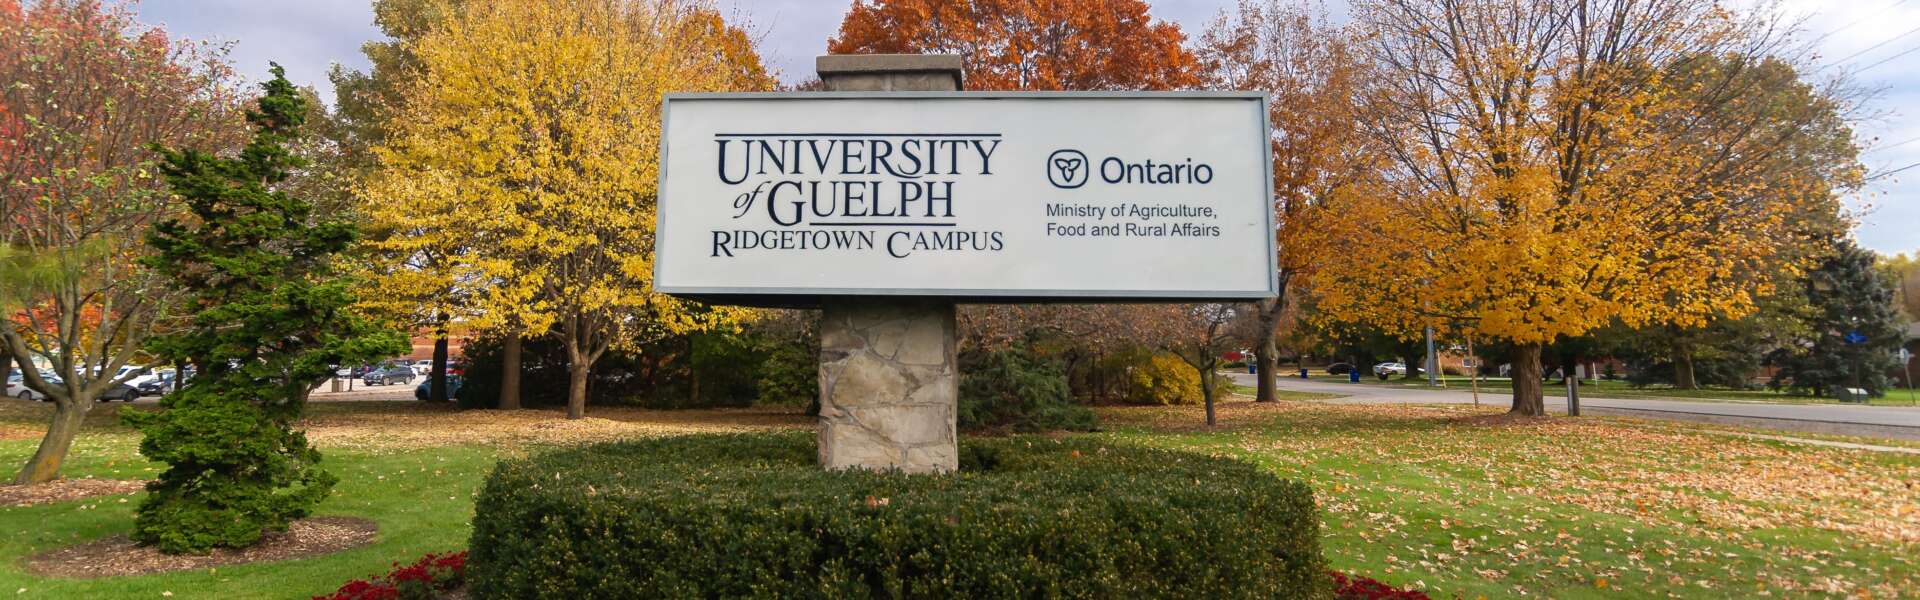 A sign reading University of Guelph Ridgetown campus is shown on a post surrounded by a circle of hedges with colourful autumn trees in the background